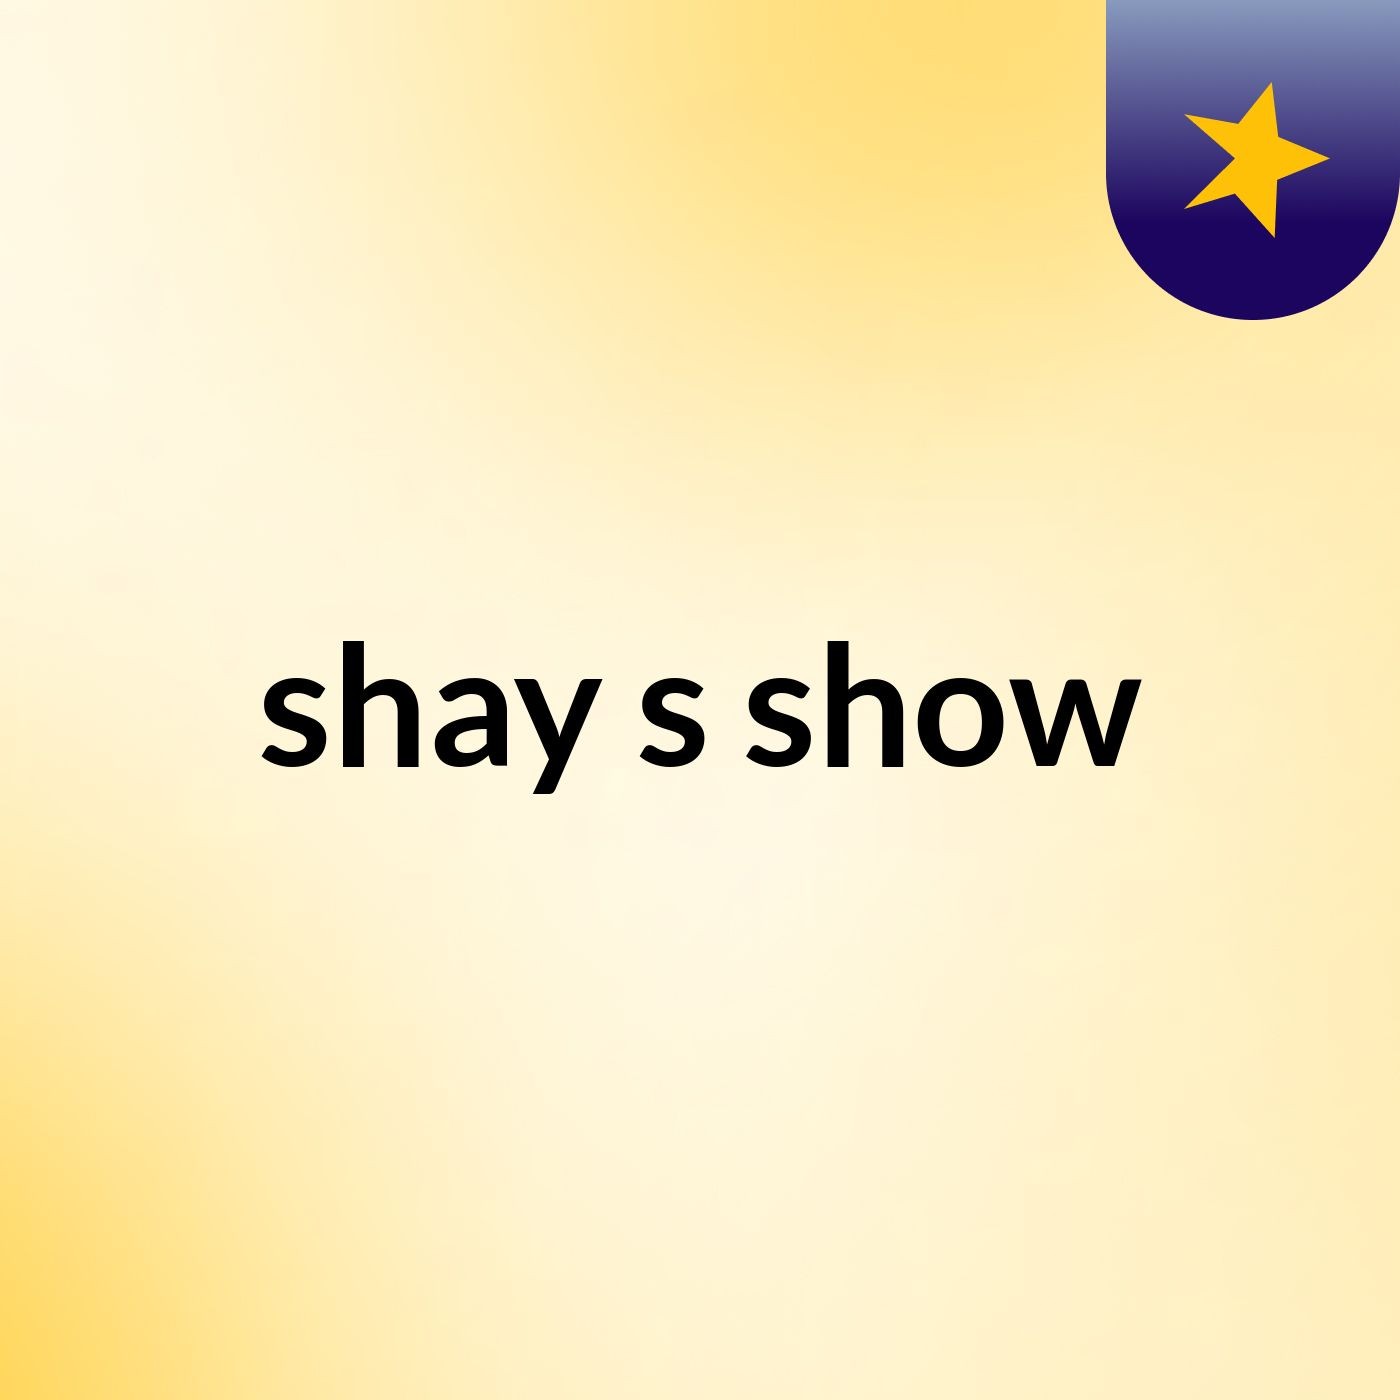 Episode 4 - shay's show